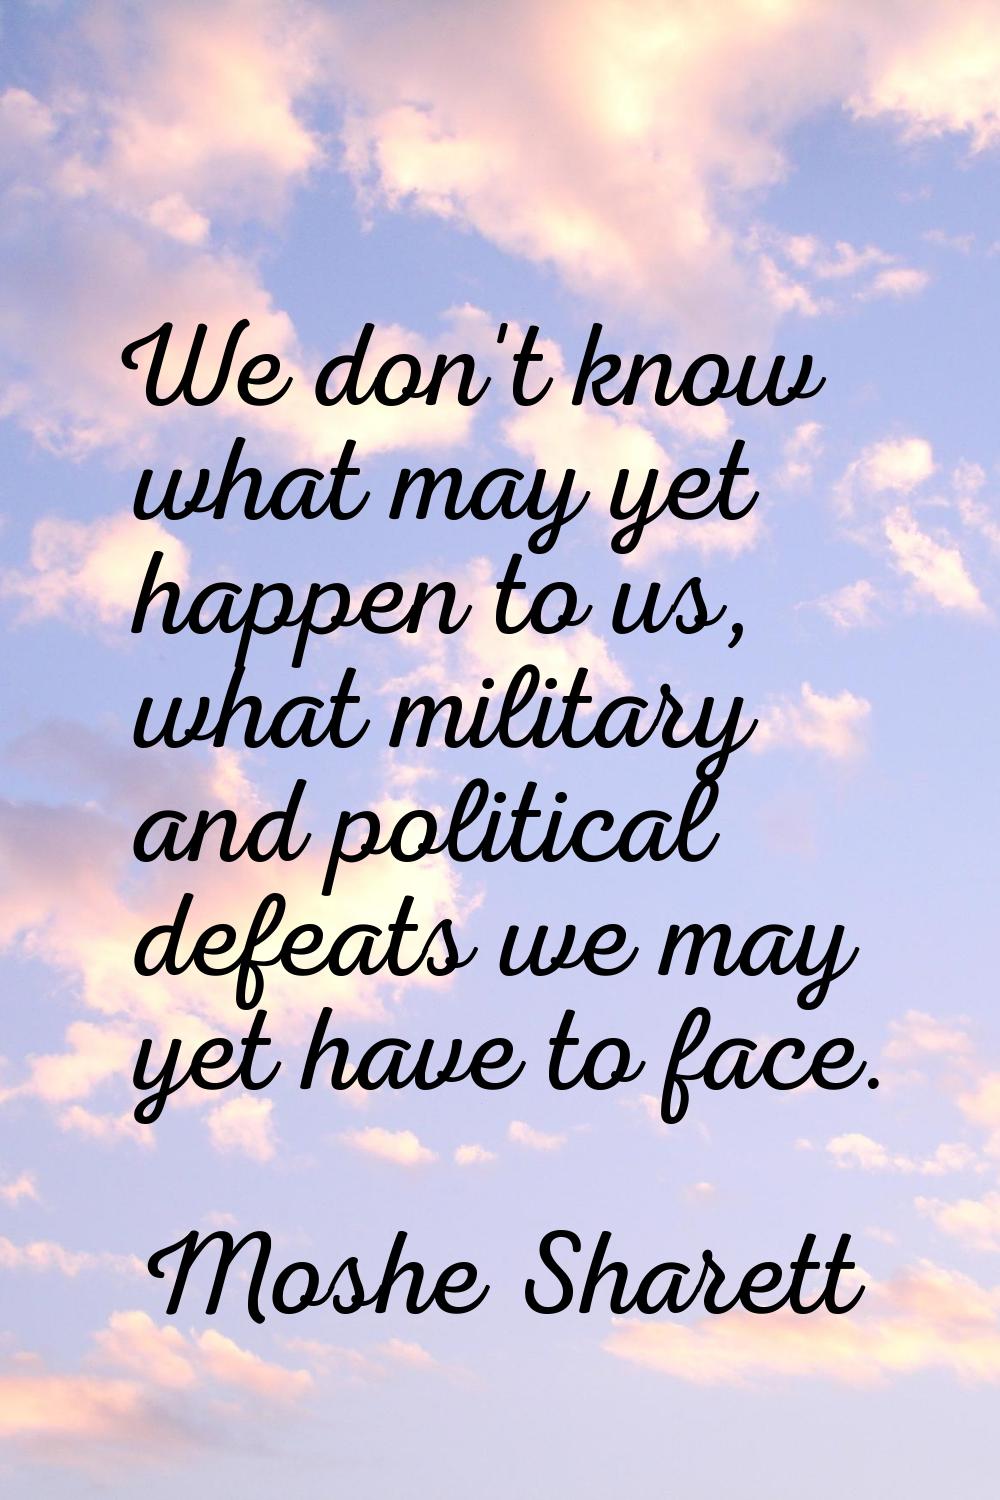 We don't know what may yet happen to us, what military and political defeats we may yet have to fac